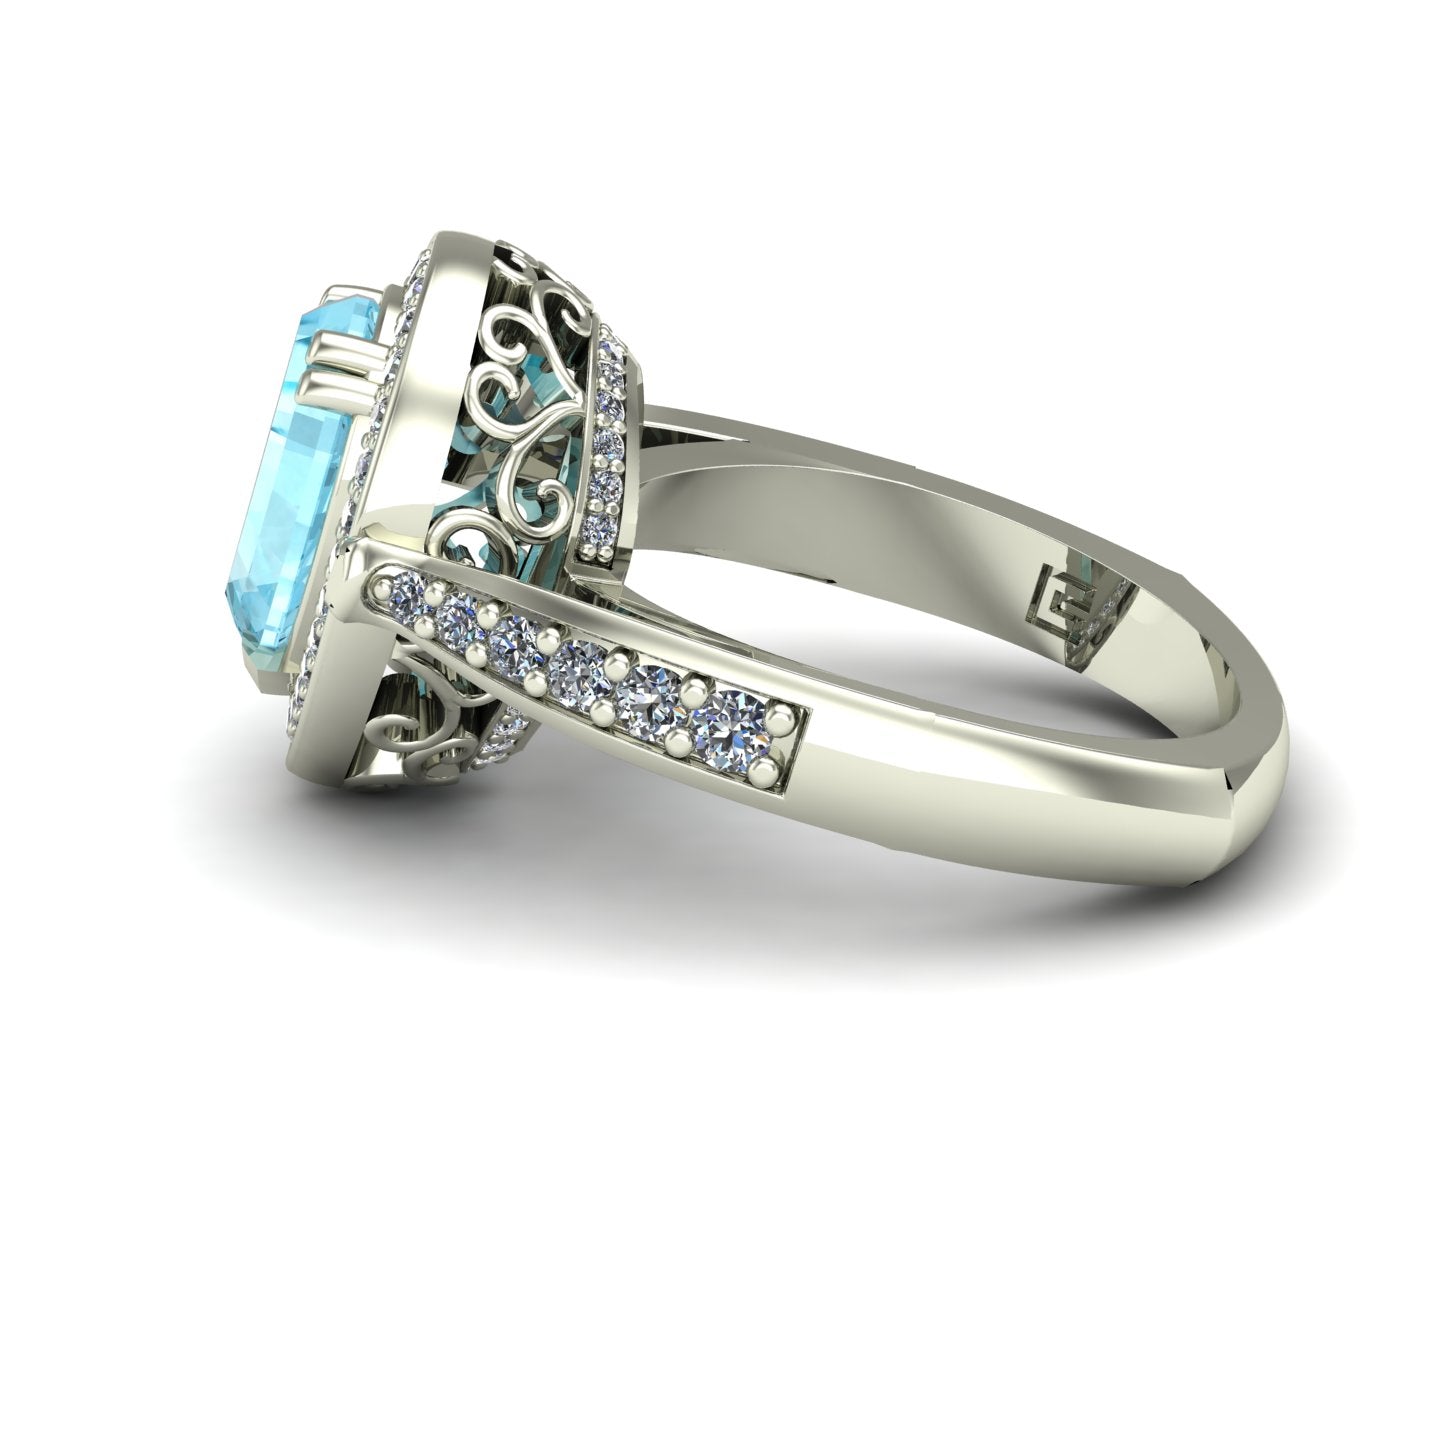 Aquamarine and diamond pear scroll ring in 14k white gold - Charles Babb Designs - side view